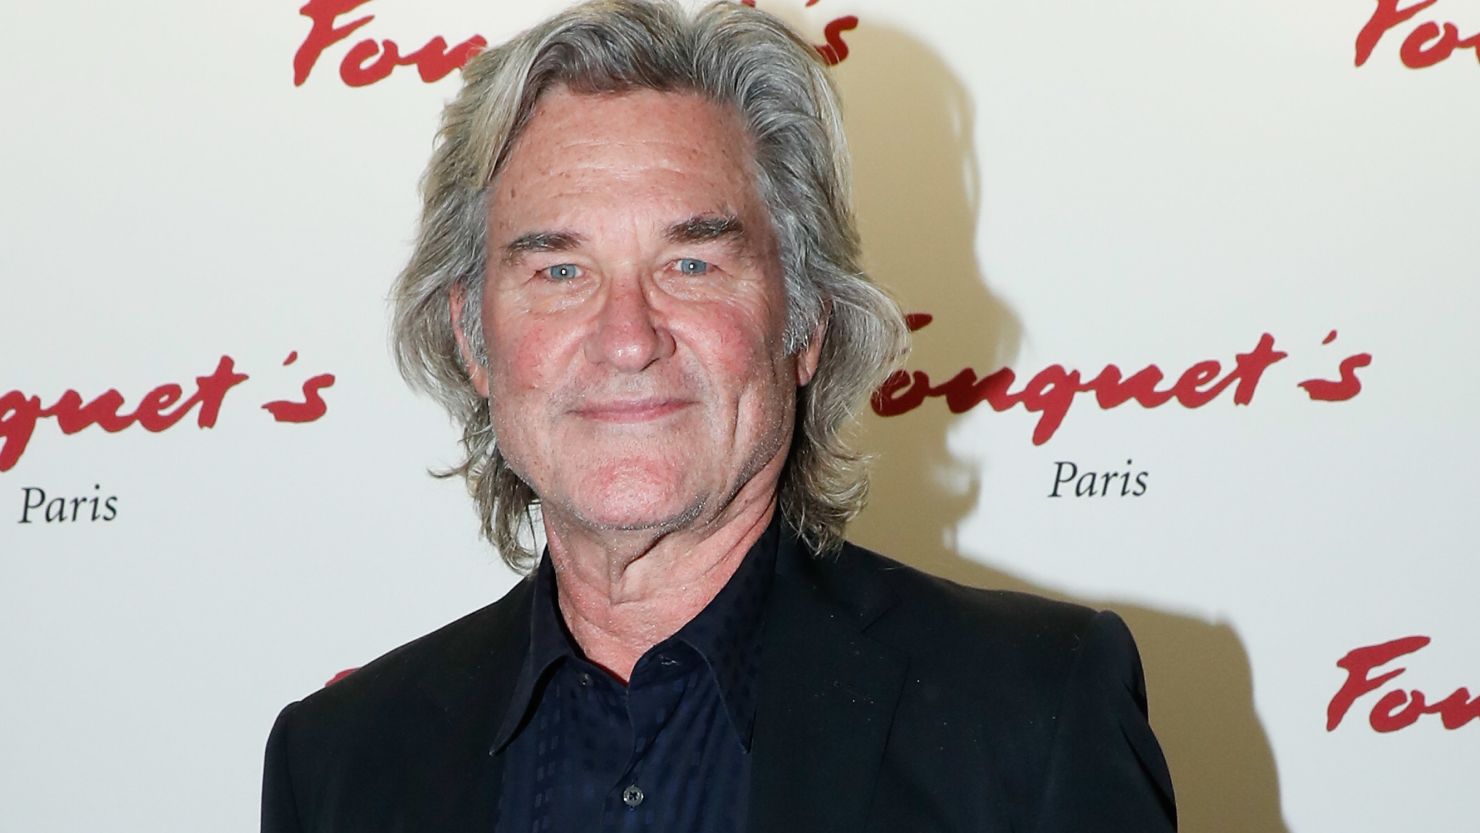 Kurt Russell, photographed here at an event in 2018, tells the New York Times in a new interview that he prefers to keep is political opinions to himself. (Photo by Bertrand Rindoff Petroff/Getty Images For Groupe Barriere)